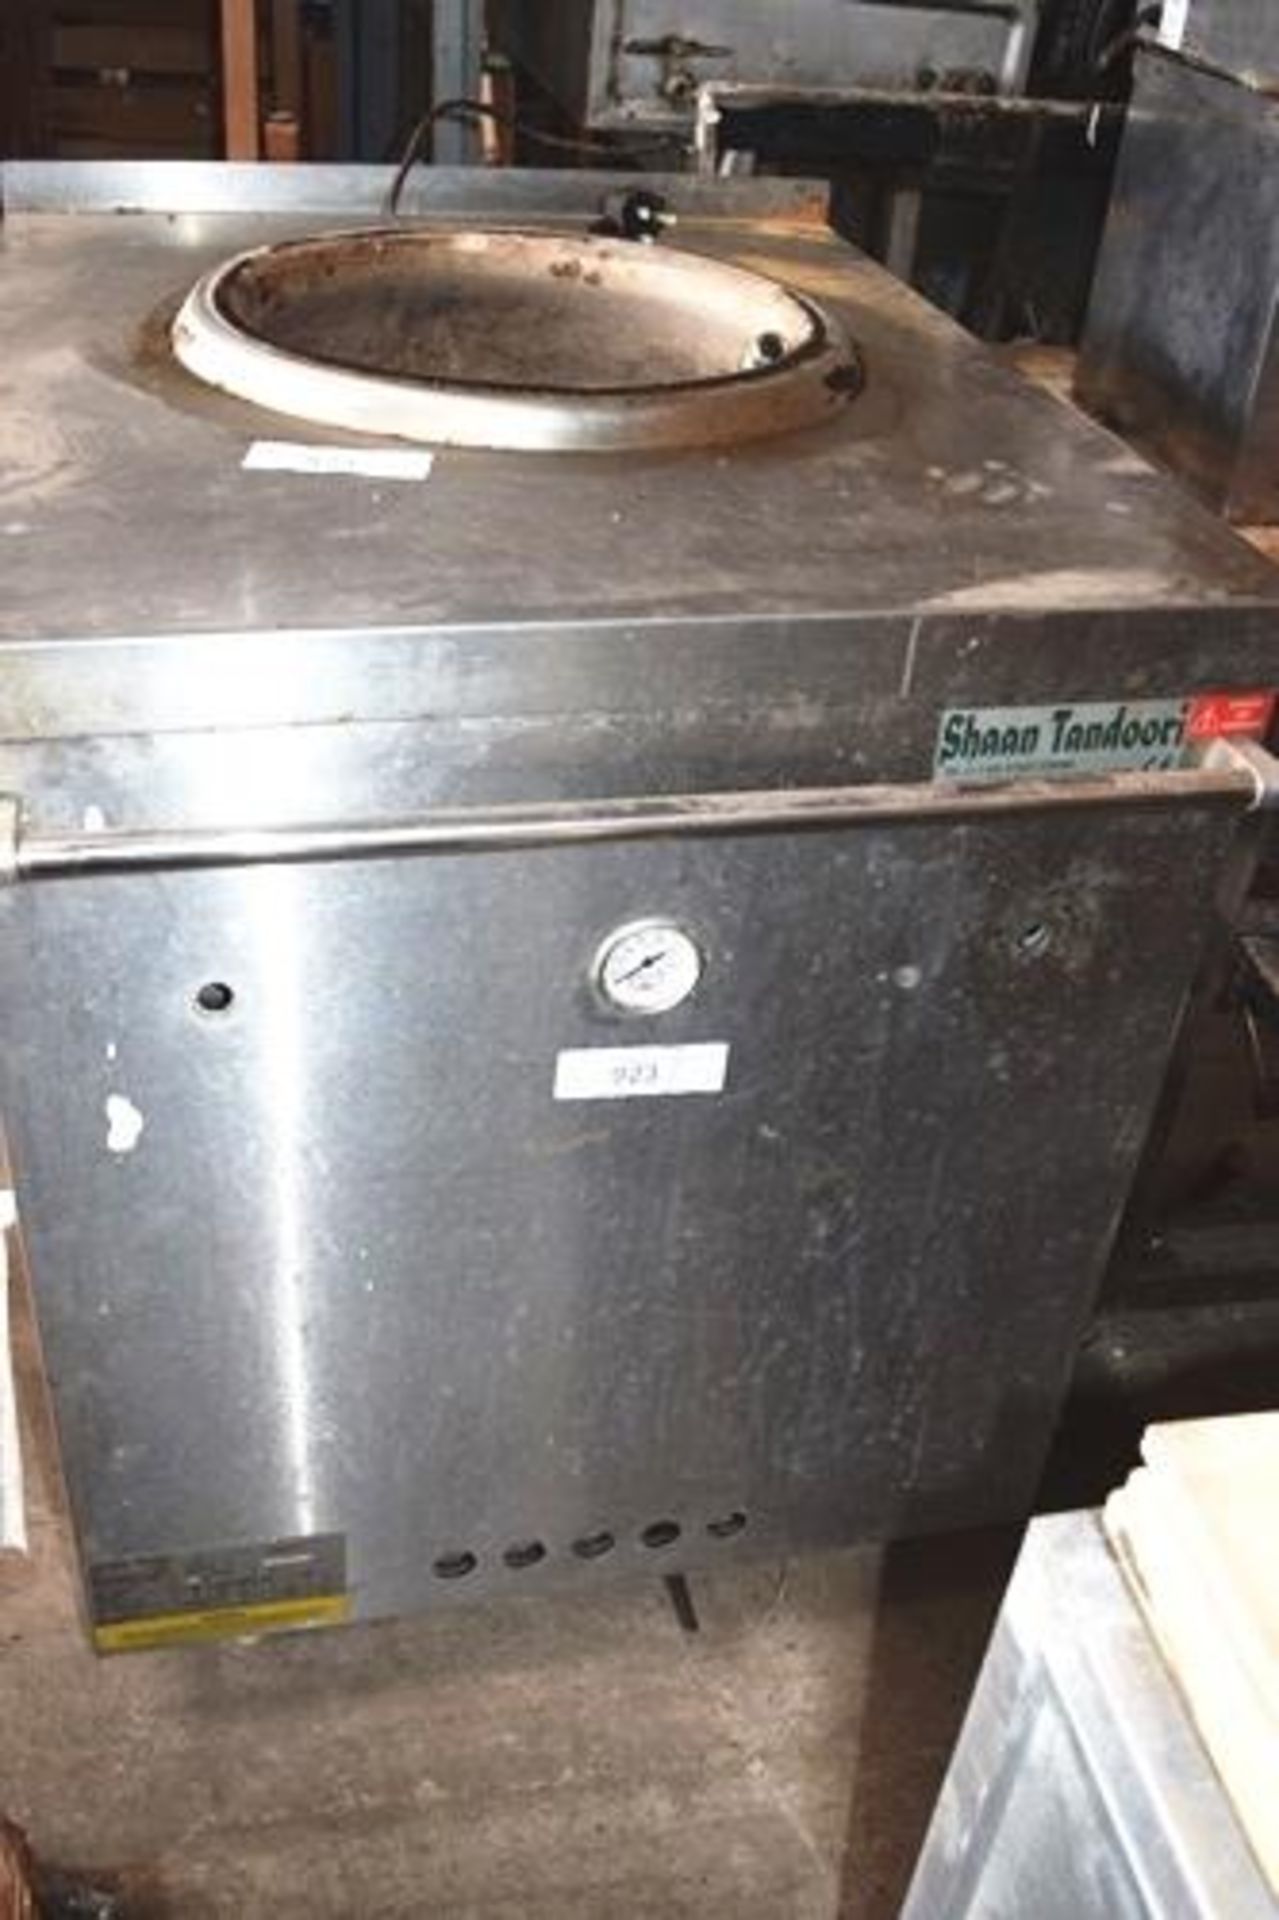 1 x Shaan gas powered tandoori oven, complete, no signs of cracking, no lid - Second-hand (yard)